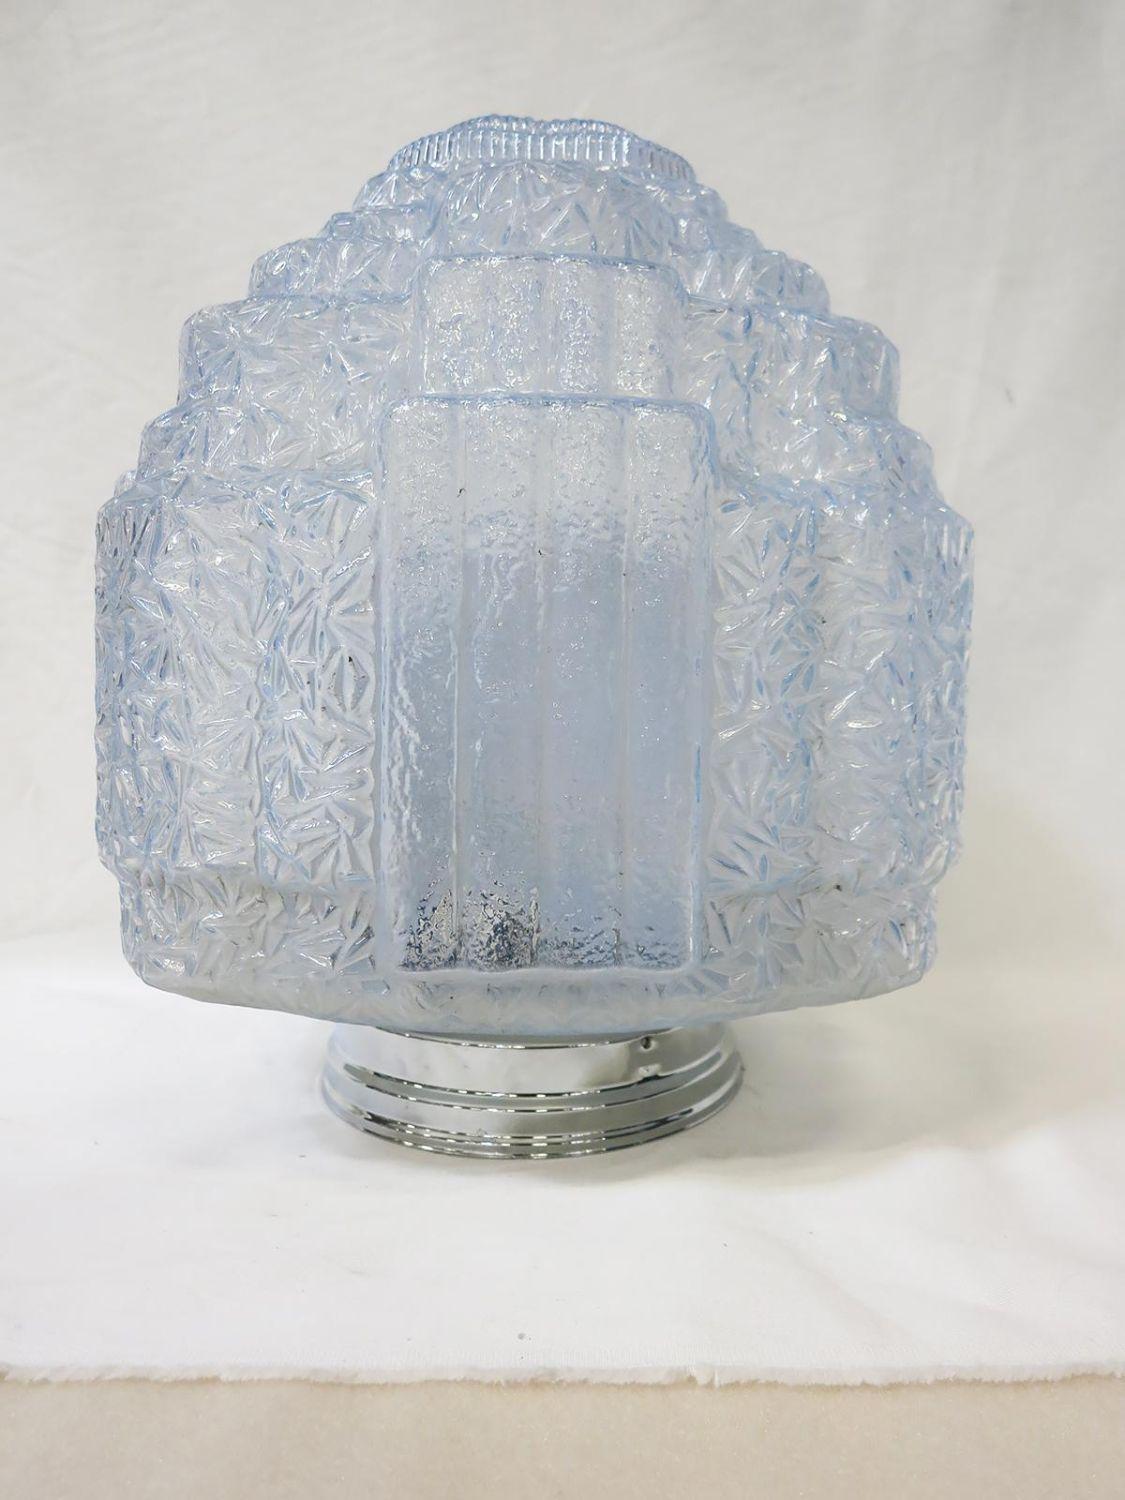 Stunning 1930's Art Deco stepped skyscraper ceiling glass globe in opalescent ice blue glass features alternating ribbed and 